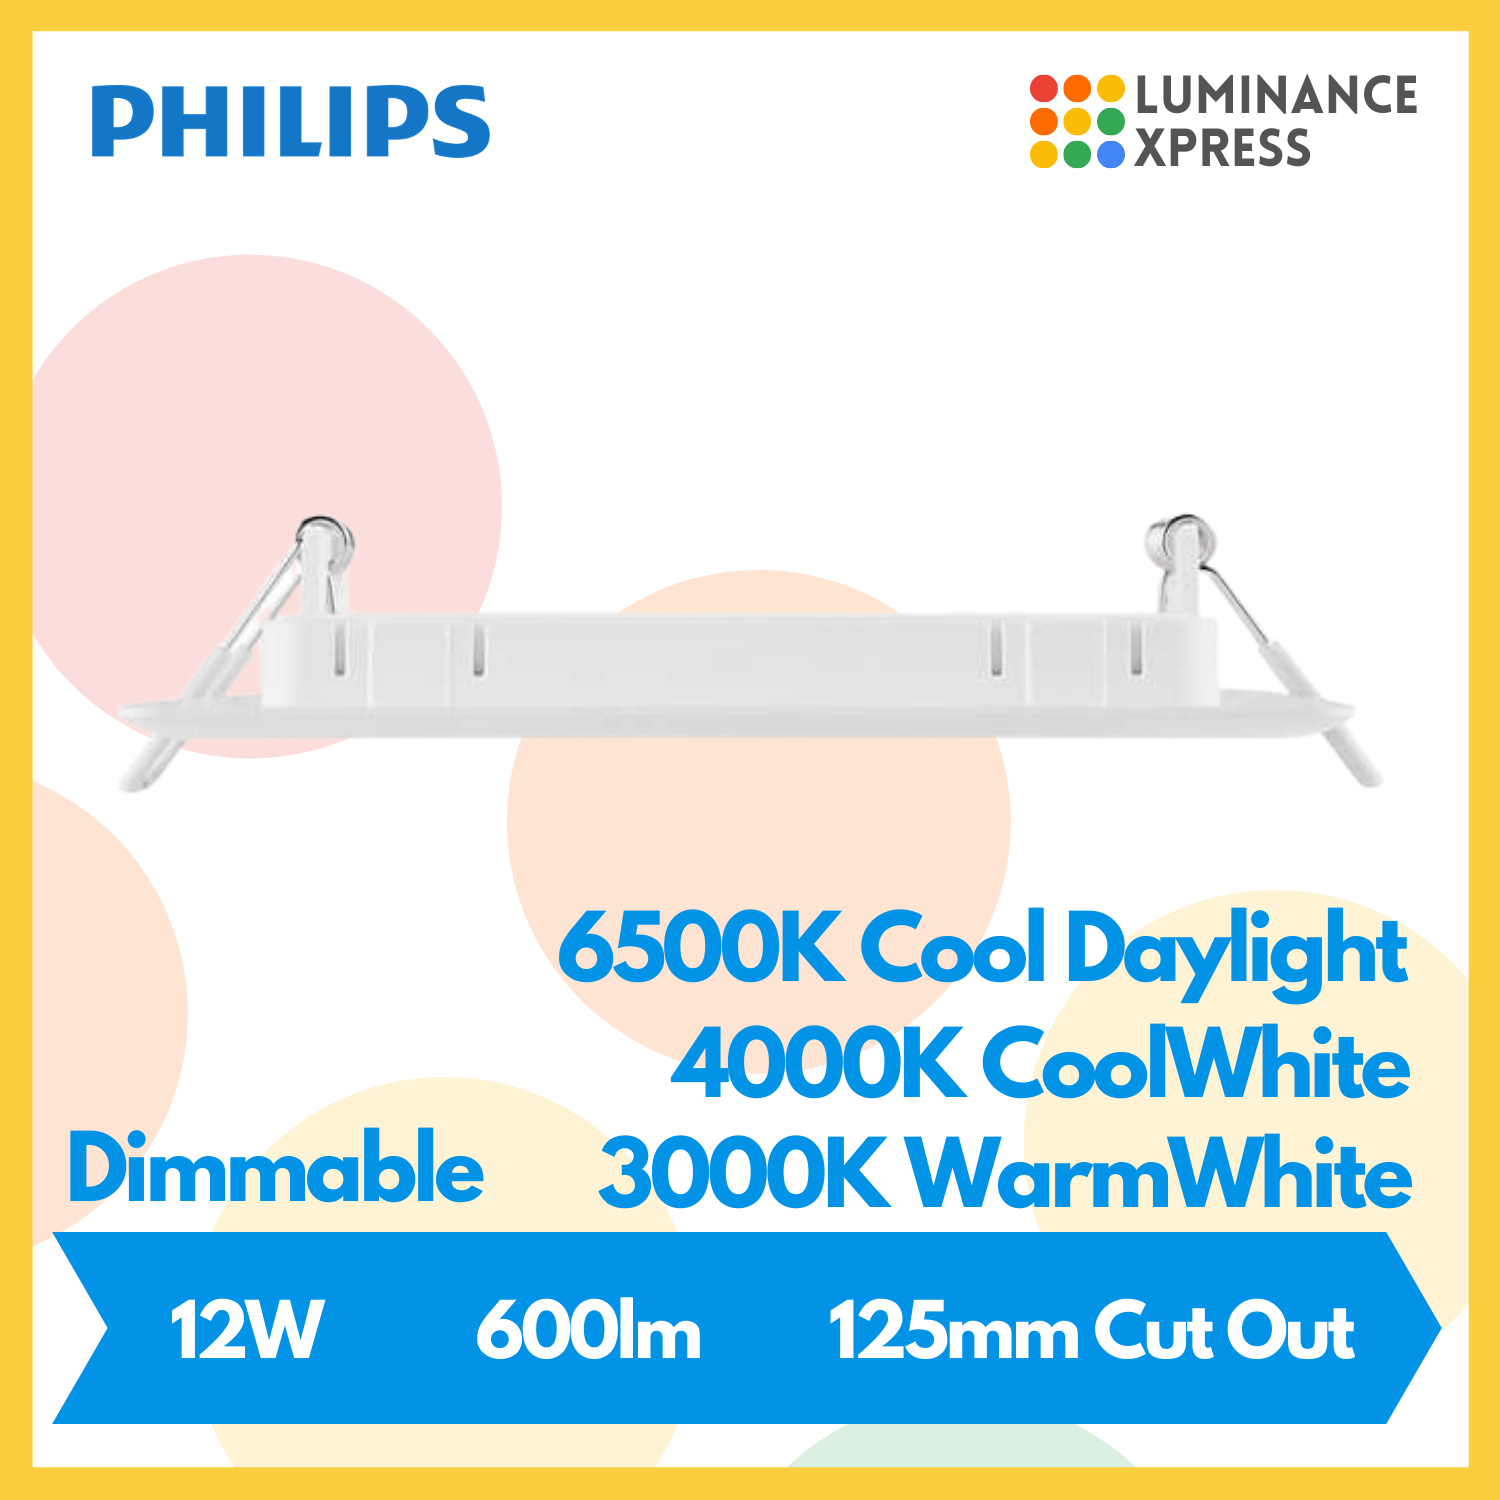 PHILIPS Dimmable Hadron Slim Downlight 5 Inch Square 12W